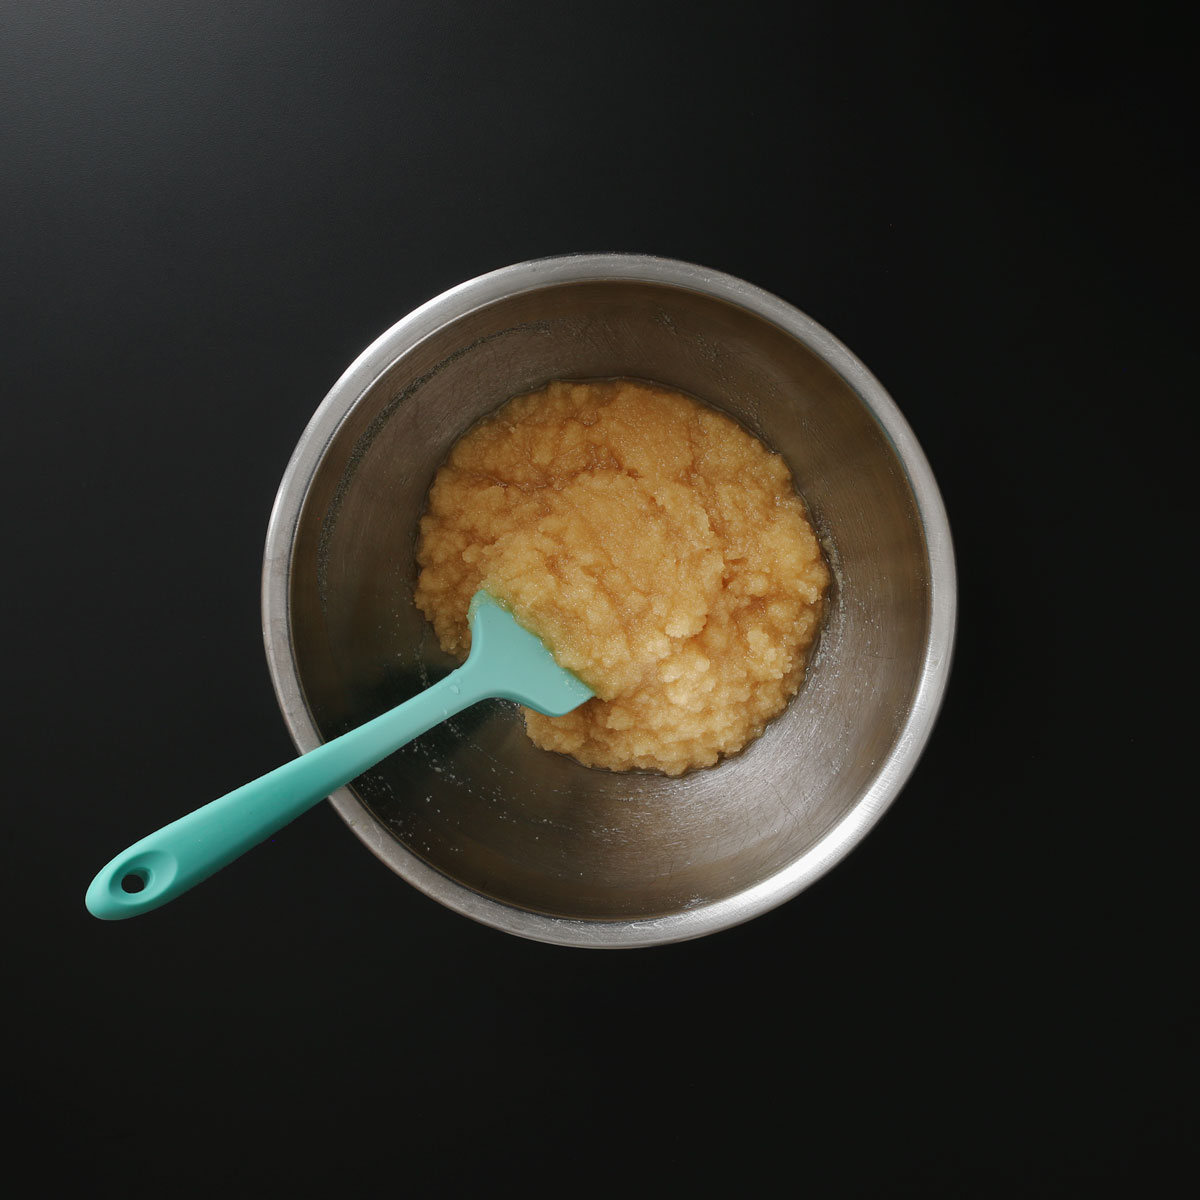 teal rubber spatula immersed in sugar and oil mixture in bowl.